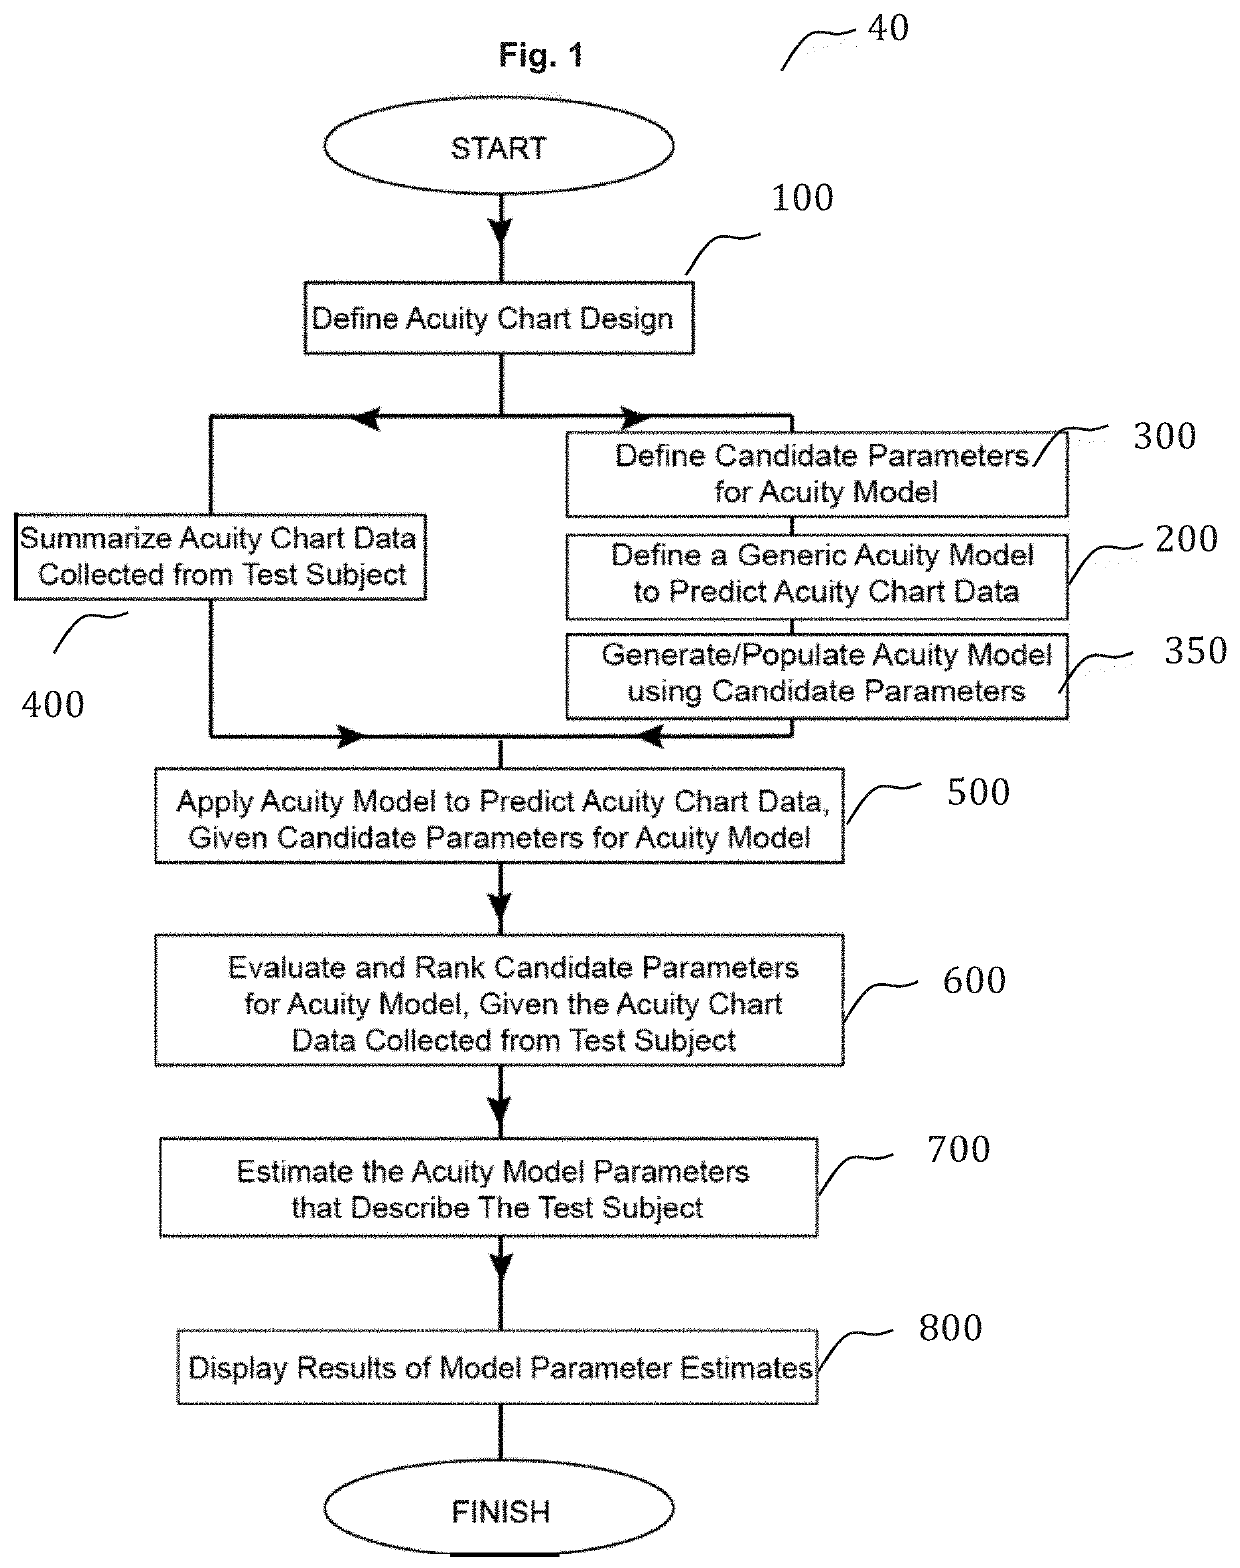 Systems and methods for testing and analysis of visual acuity and its changes